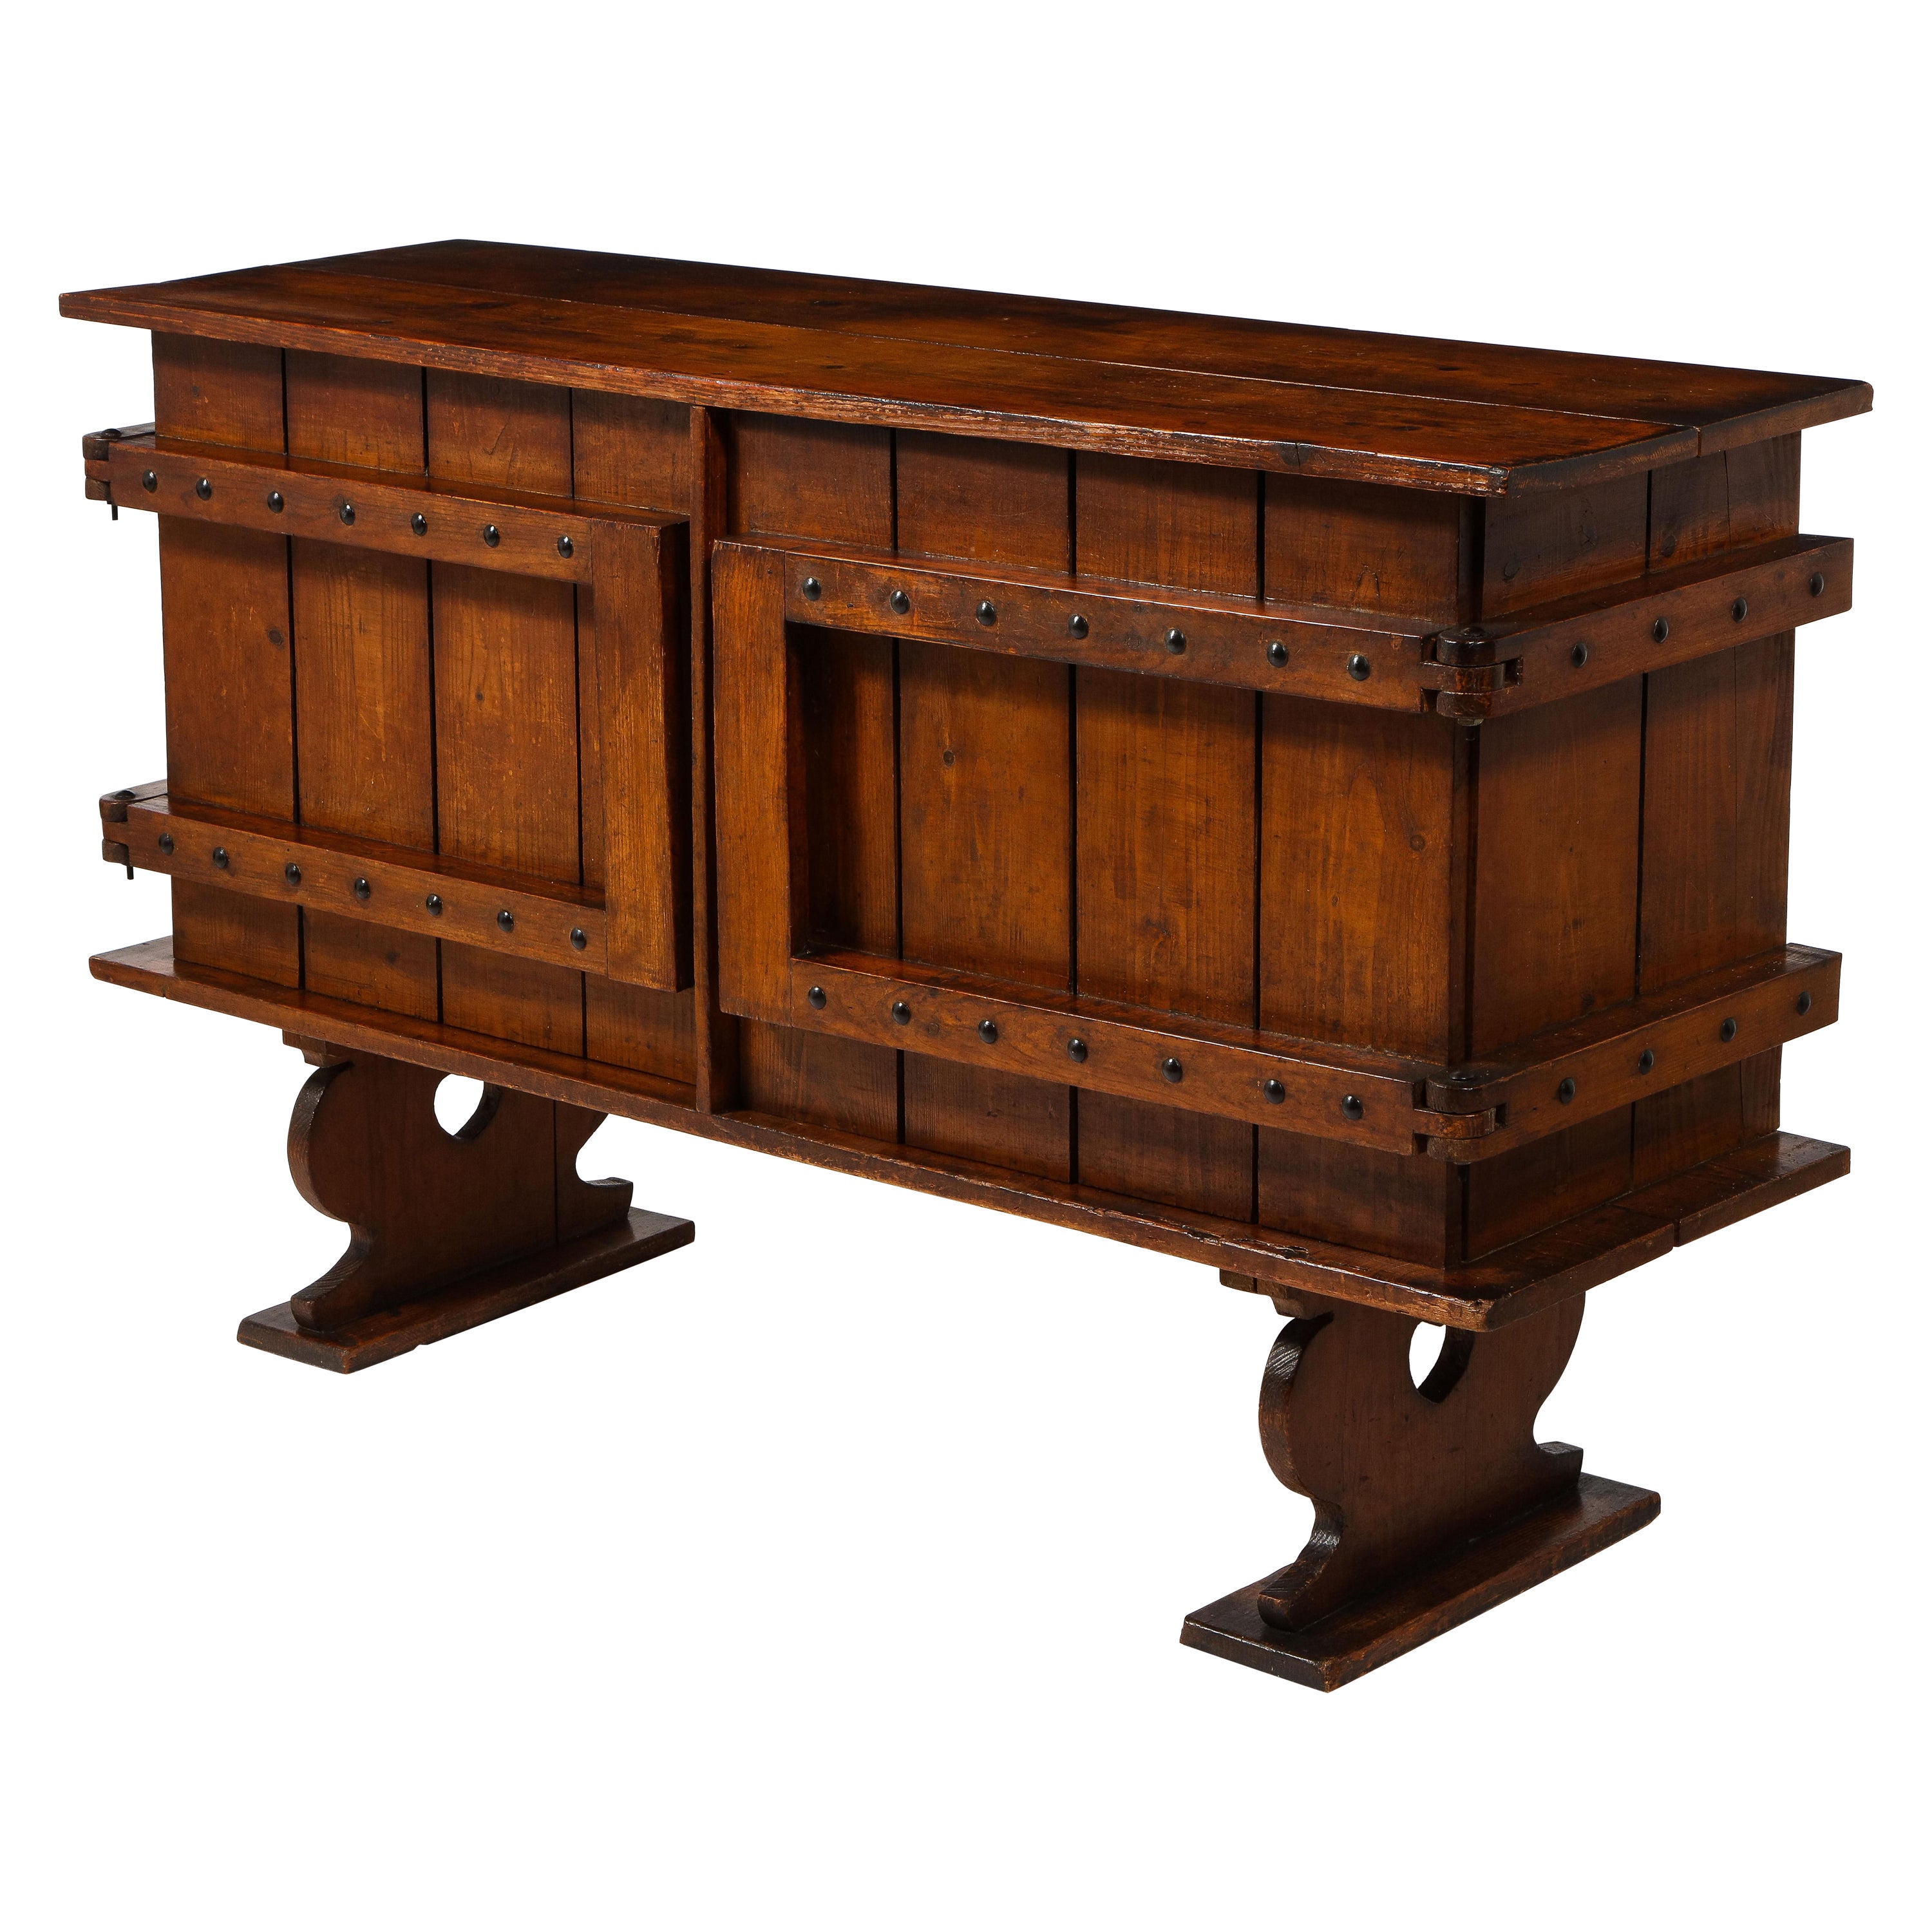 Brutalist Neo-Gothic Rustic Two-Door Pine Sideboard Credenza, France 1920's For Sale